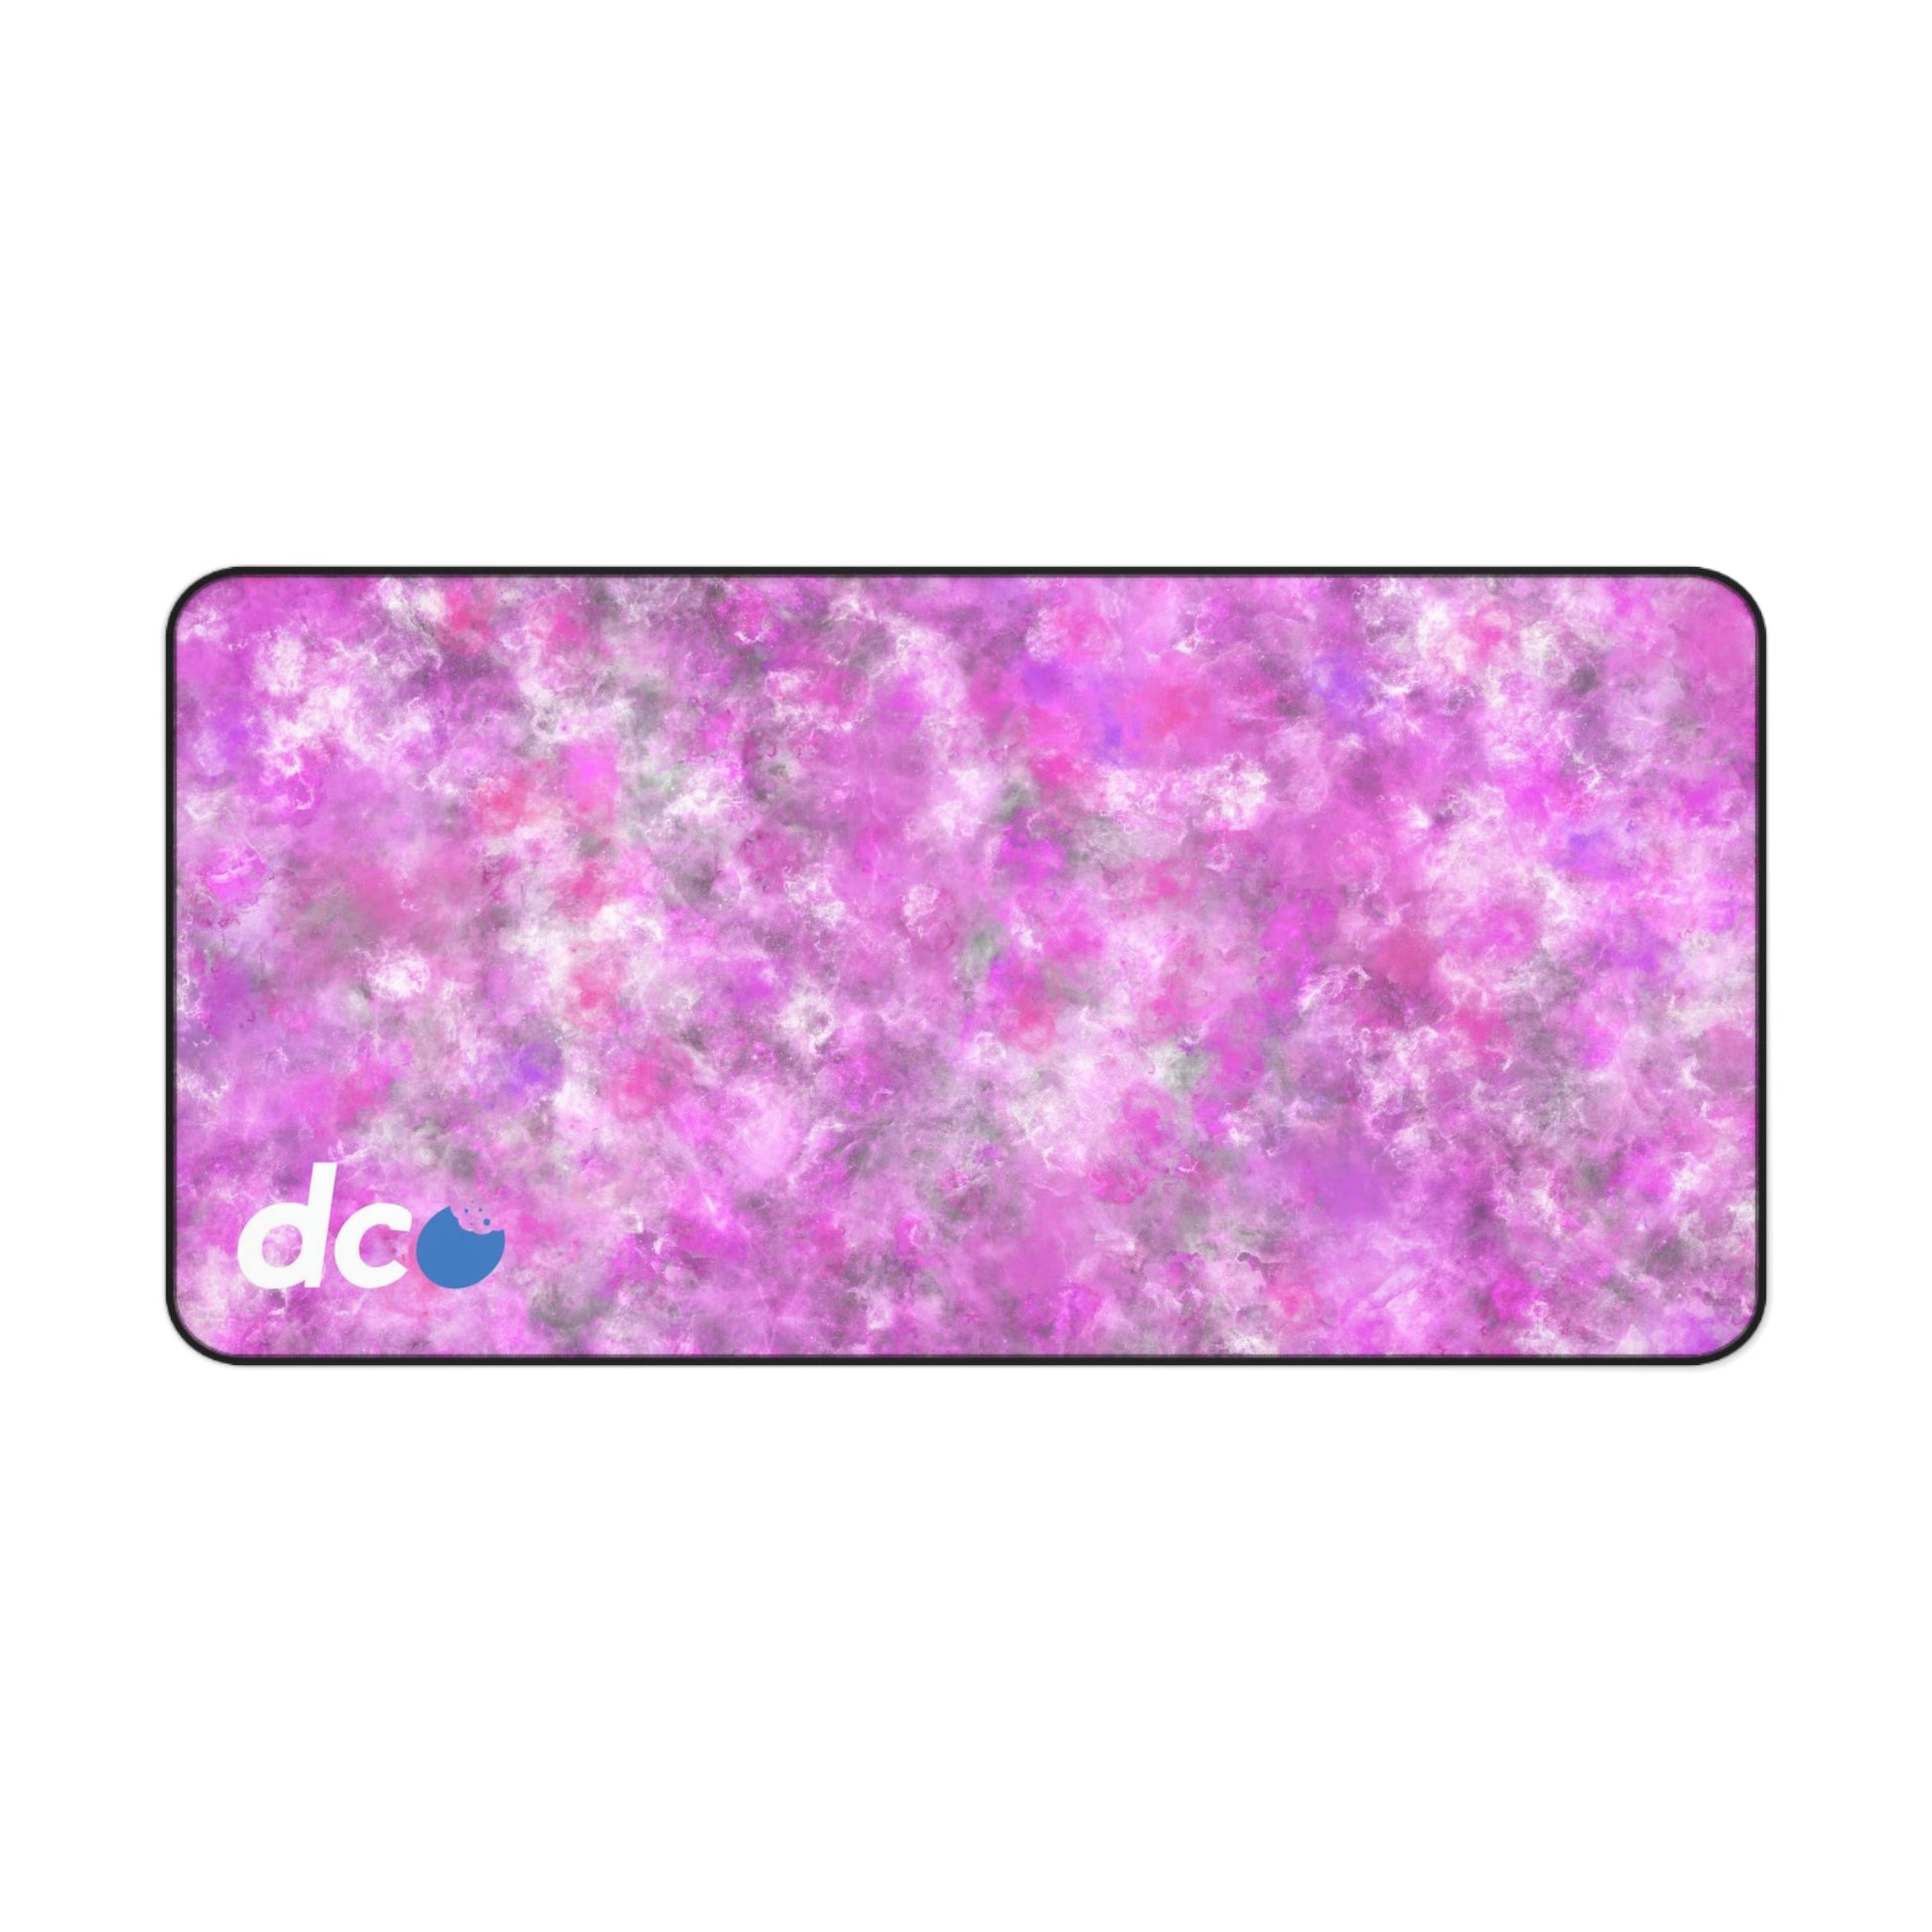 A 31" x 15.5" desk mat with a fluffy mix of pink, white, and gray.